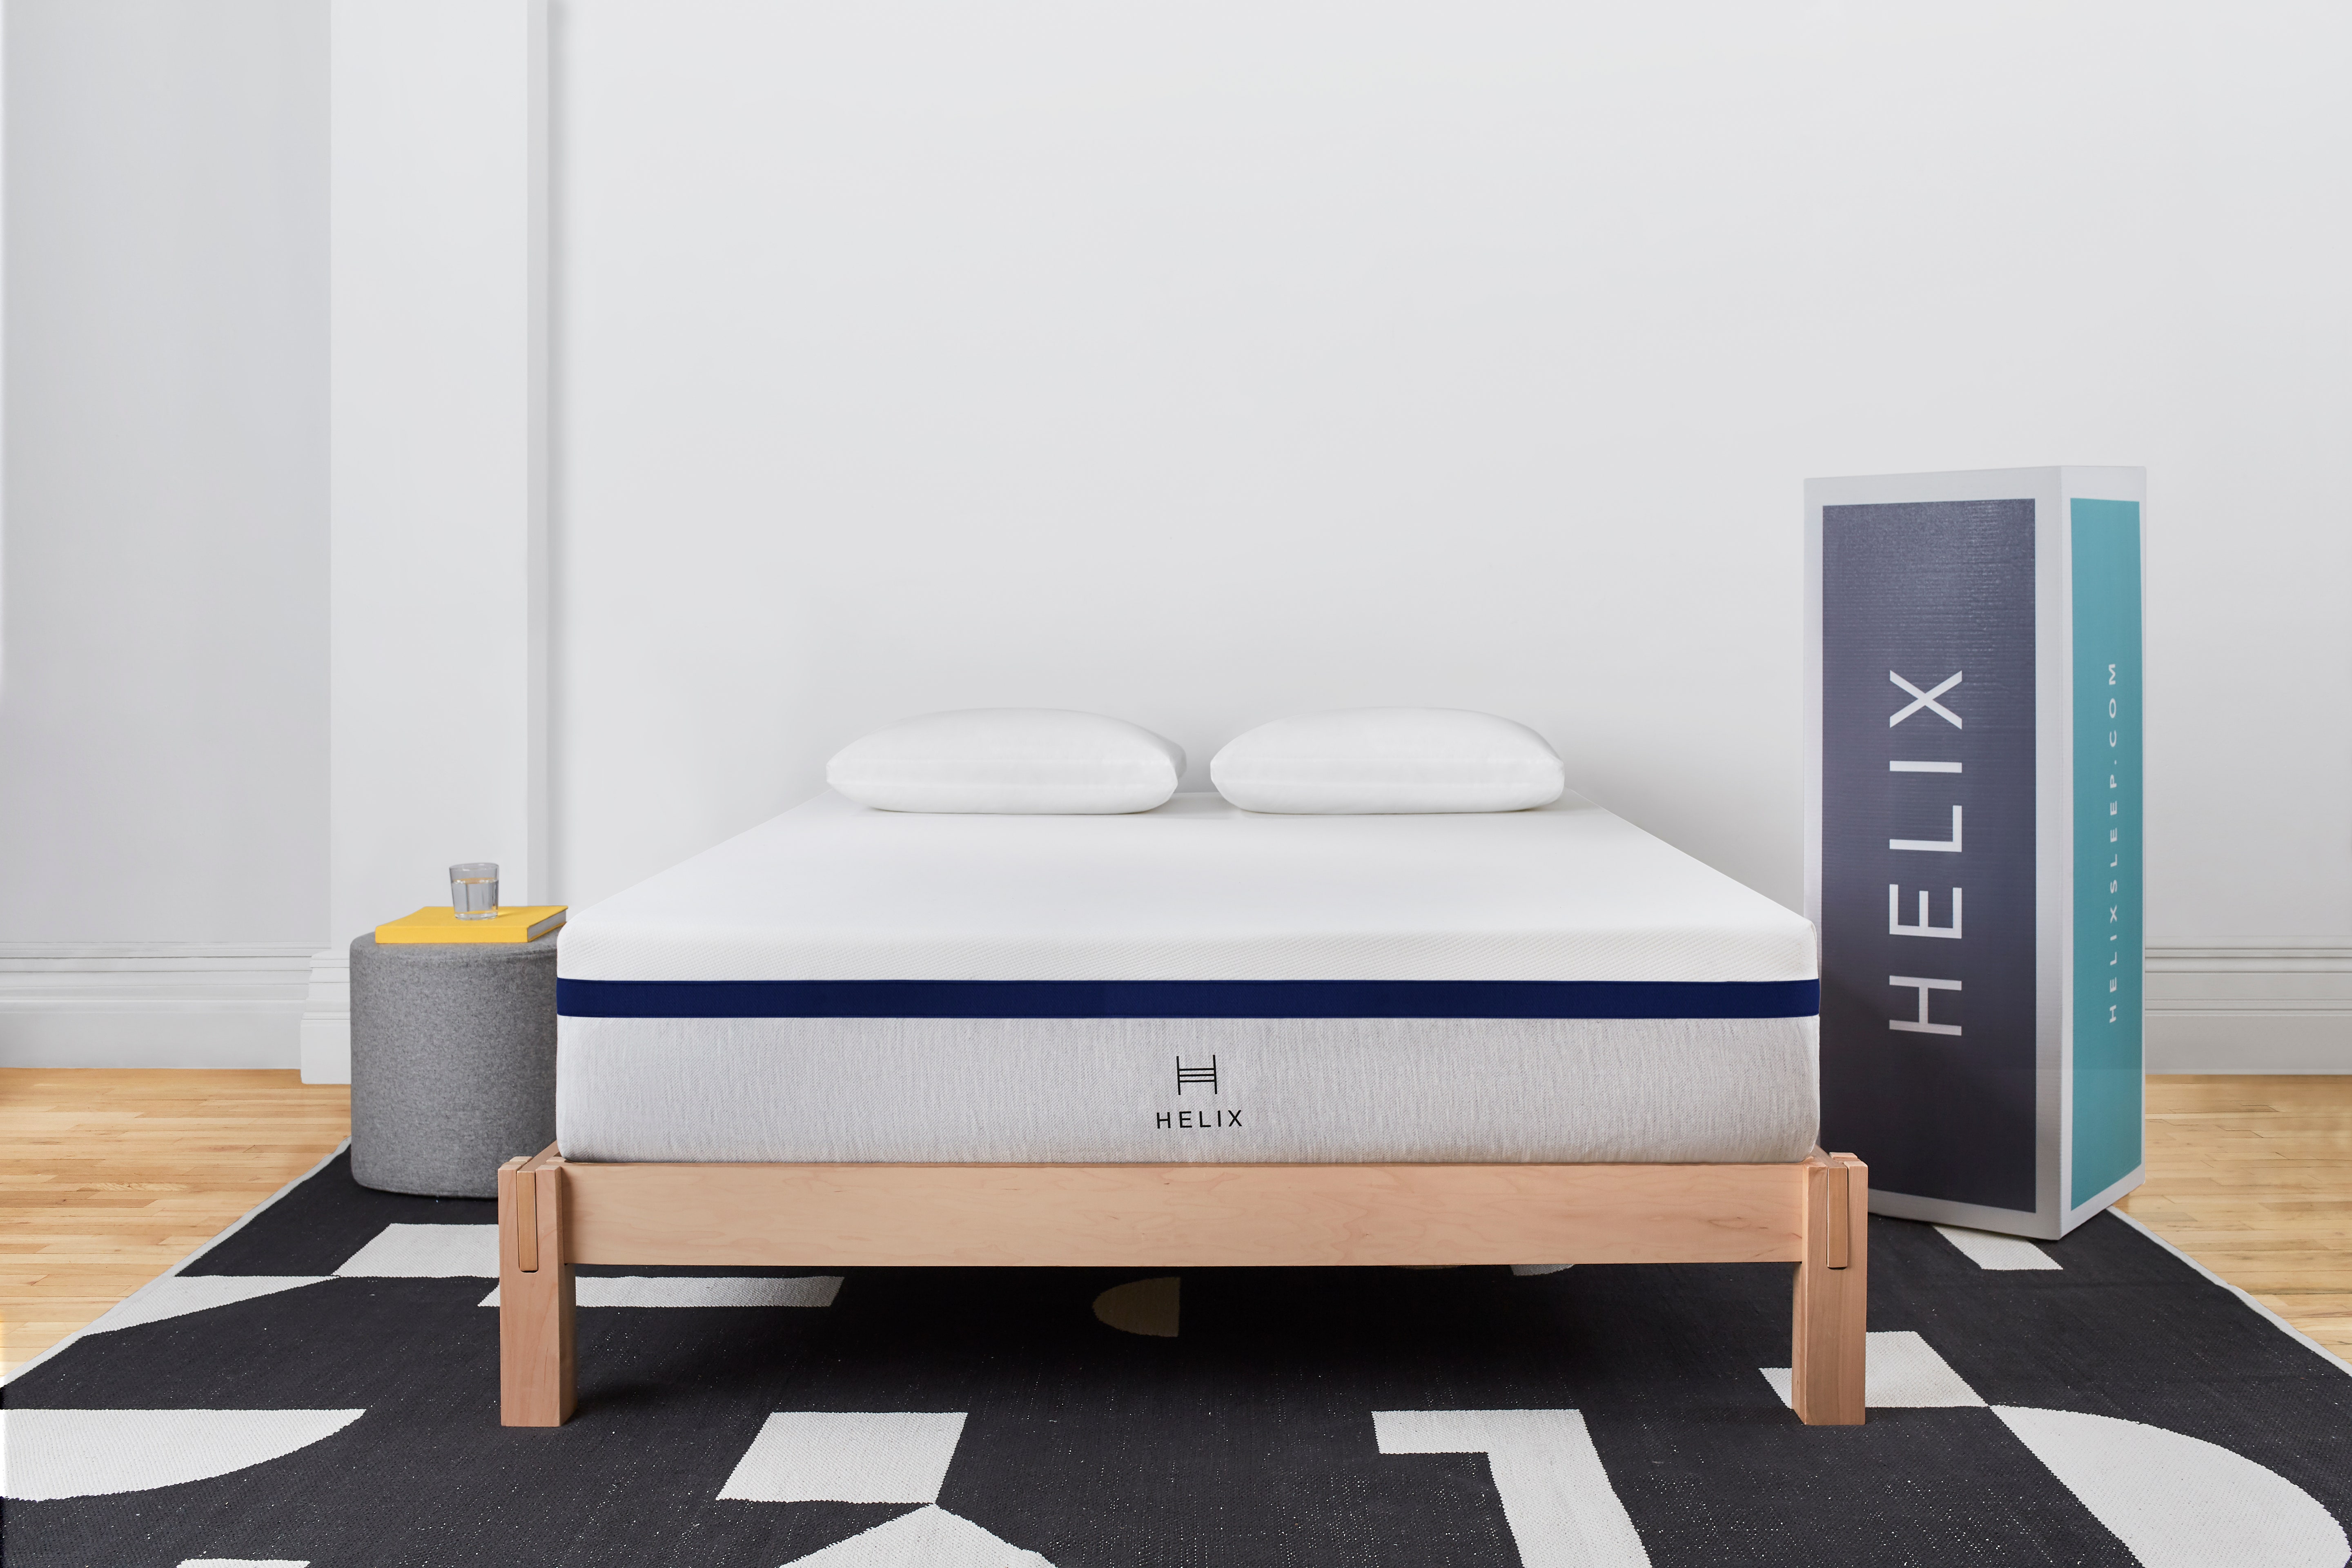 What Are Some Alternatives To The Nectar Mattress Box?